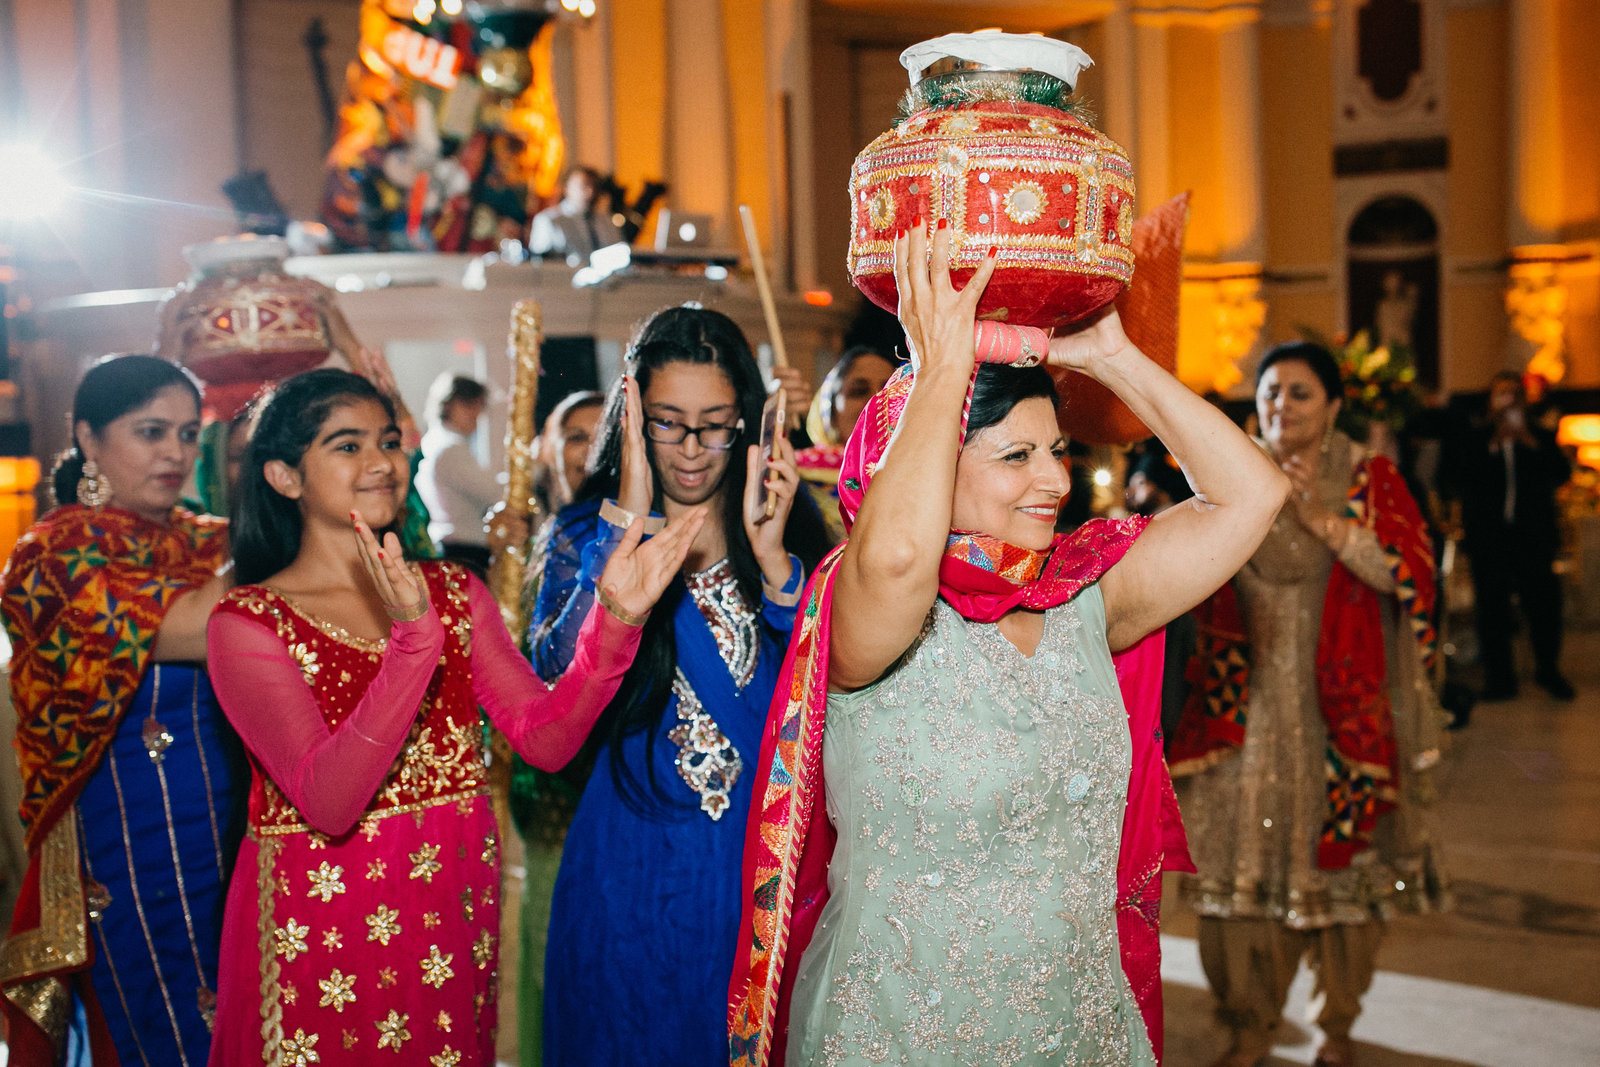 Traditional Indian wedding festivities during the reception at this Philadelphia museum wedding.